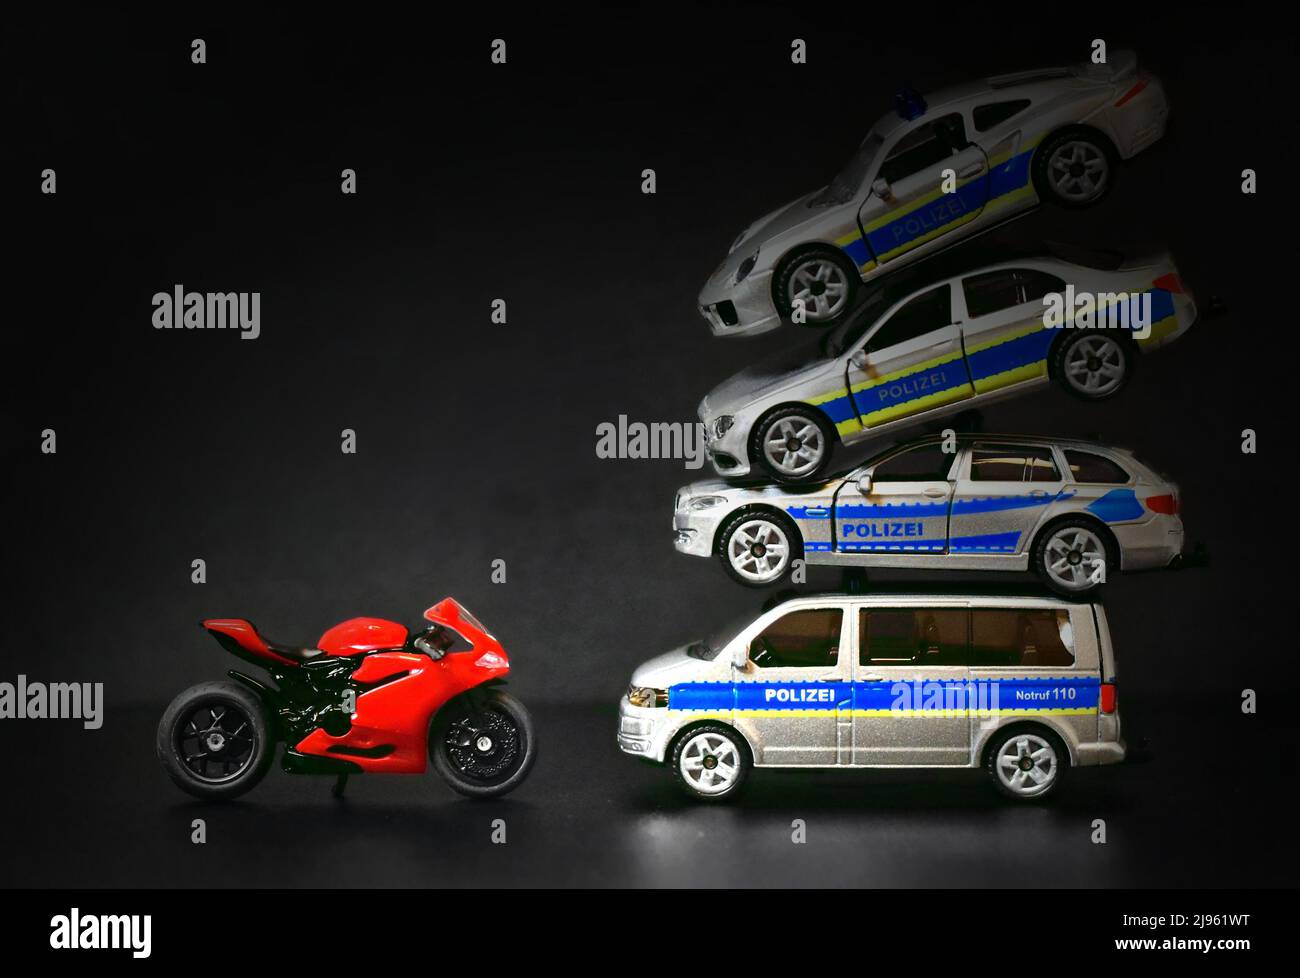 german police toy cars Stock Photo